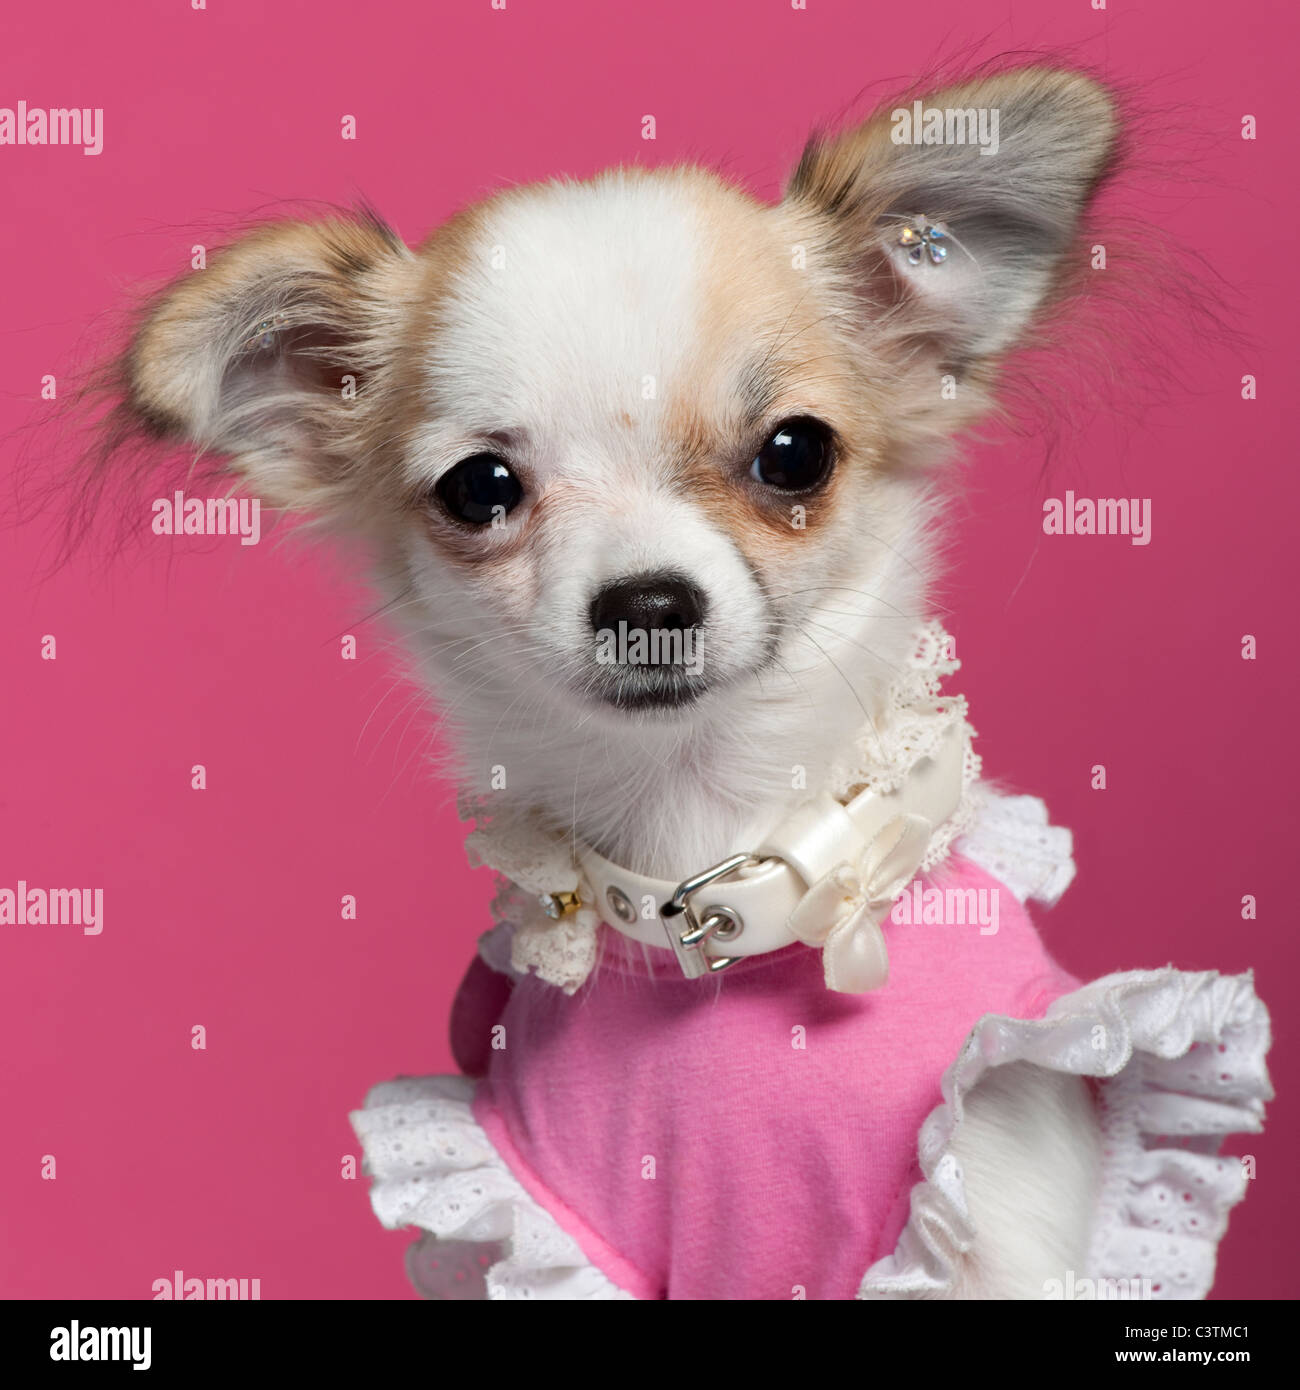 Close-up of Chihuahua puppy in pink dress, 6 months old, in front of pink background Stock Photo